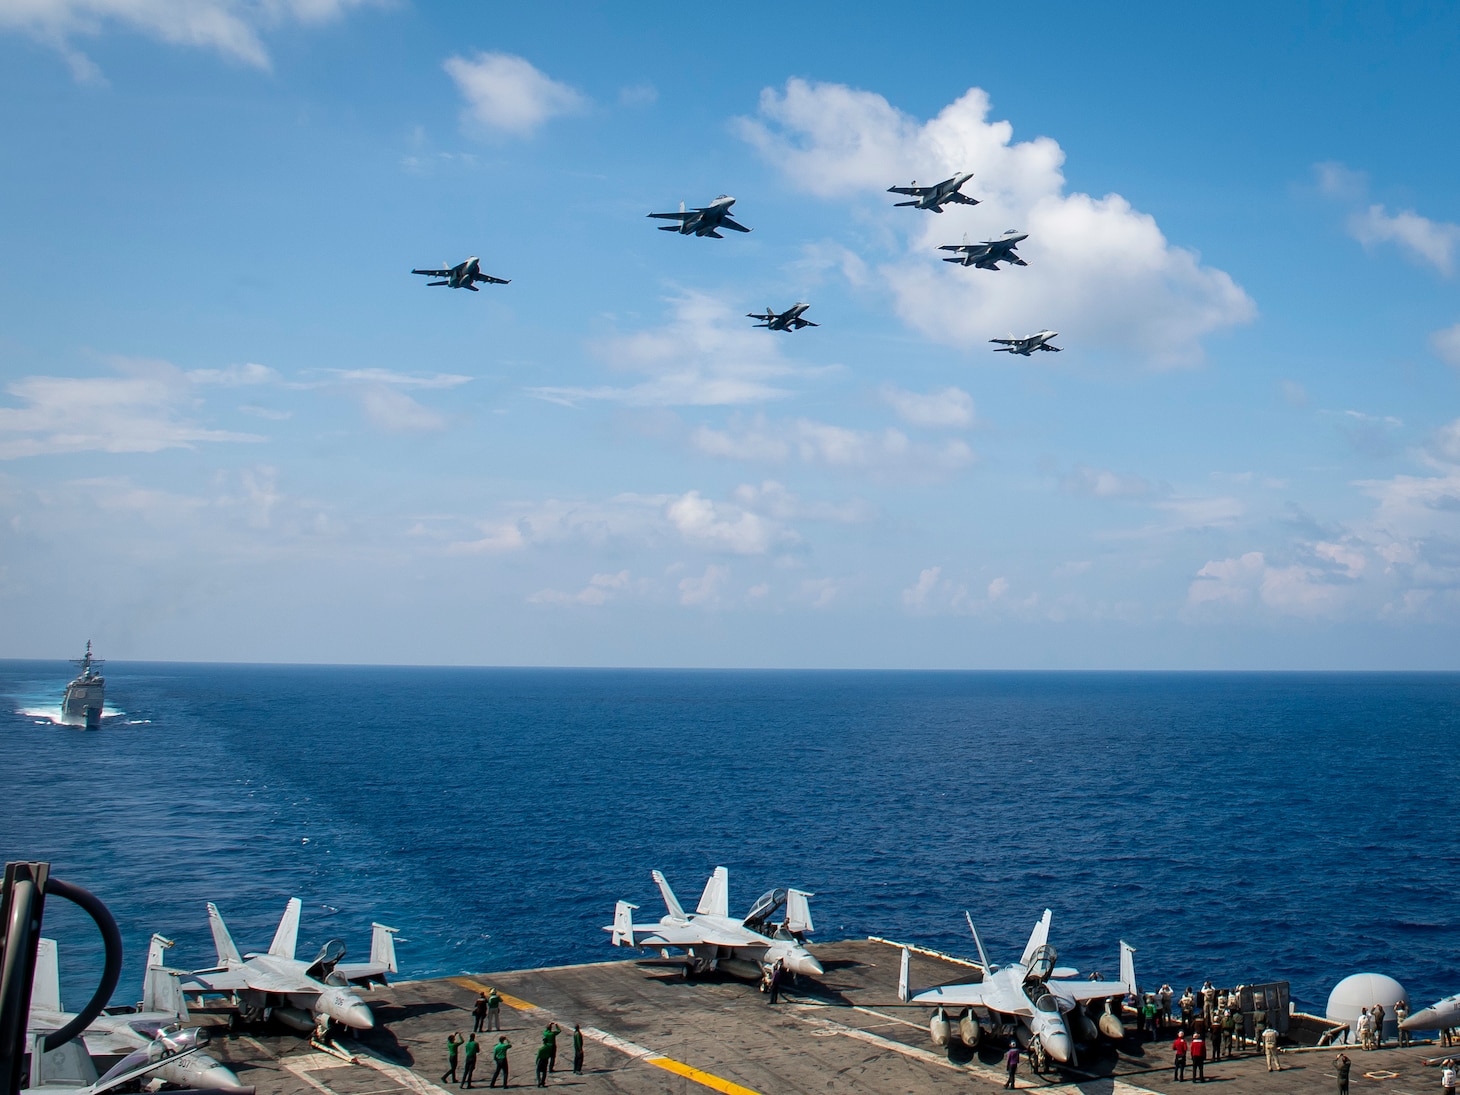 Aircraft from Carrier Air Wing (CVW) 11 and the Royal Malaysian Air Force (RMAF) fly above the aircraft carrier USS Theodore Roosevelt (CVN 71) April 7, 2021. The Theodore Roosevelt Carrier Strike Group is on a scheduled deployment to the U.S. 7th Fleet area of operations. As the U.S. Navy’s largest forward-deployed fleet, 7th Fleet routinely operates and interacts with 35 maritime nations while conducting missions to preserve and protect a free and open Indo-Pacific Region.